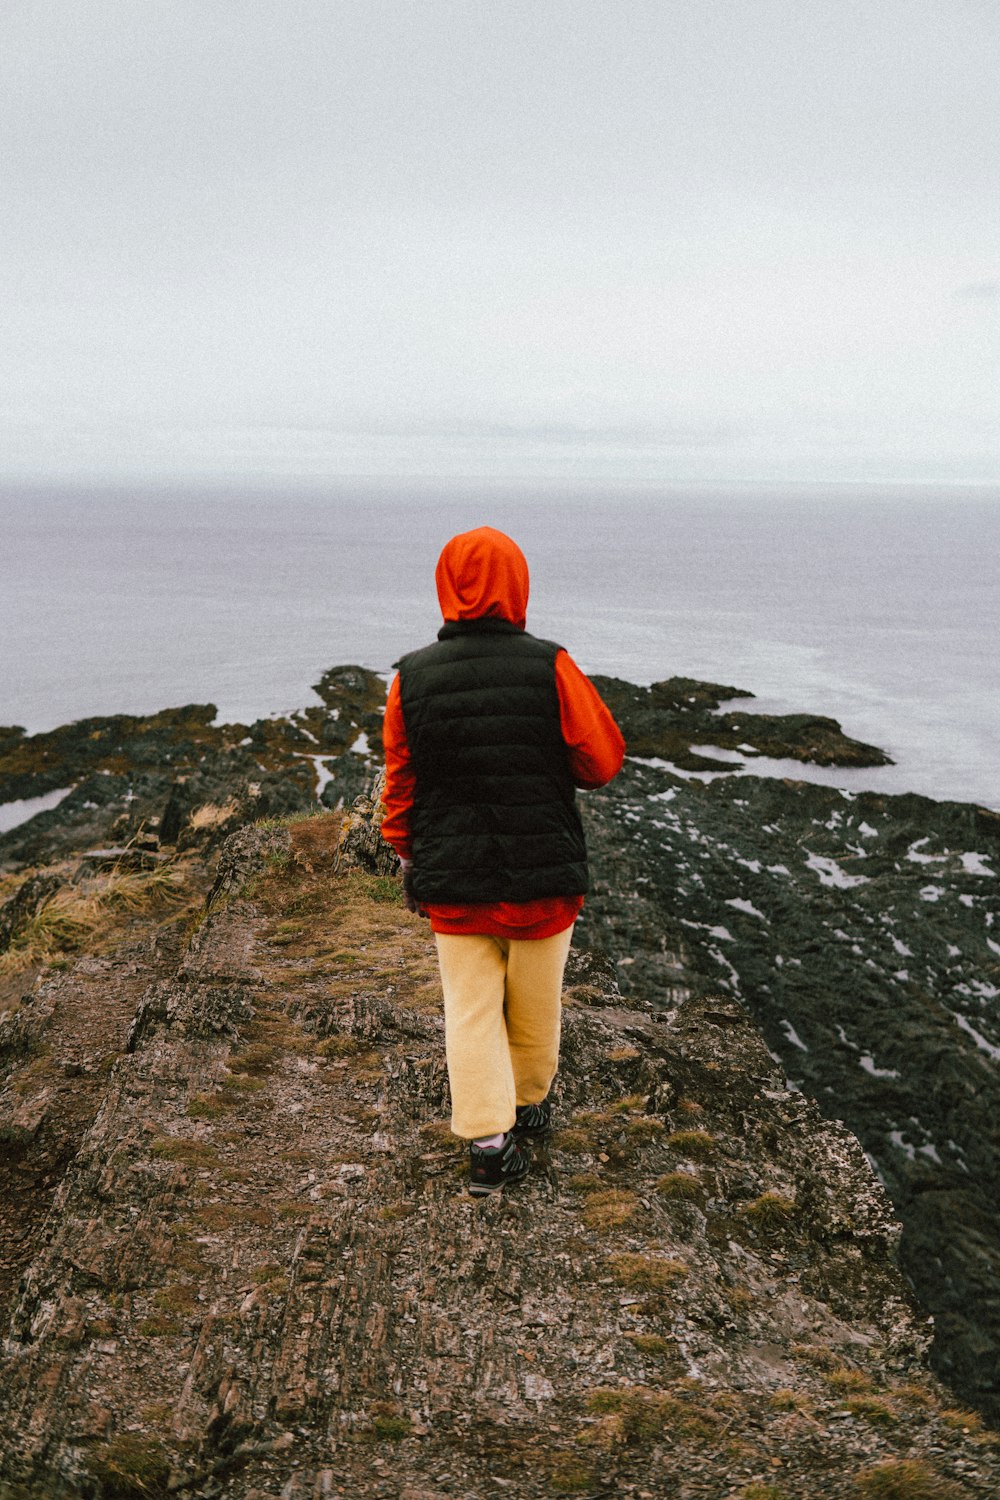 a person standing on a rocky hill overlooking the ocean